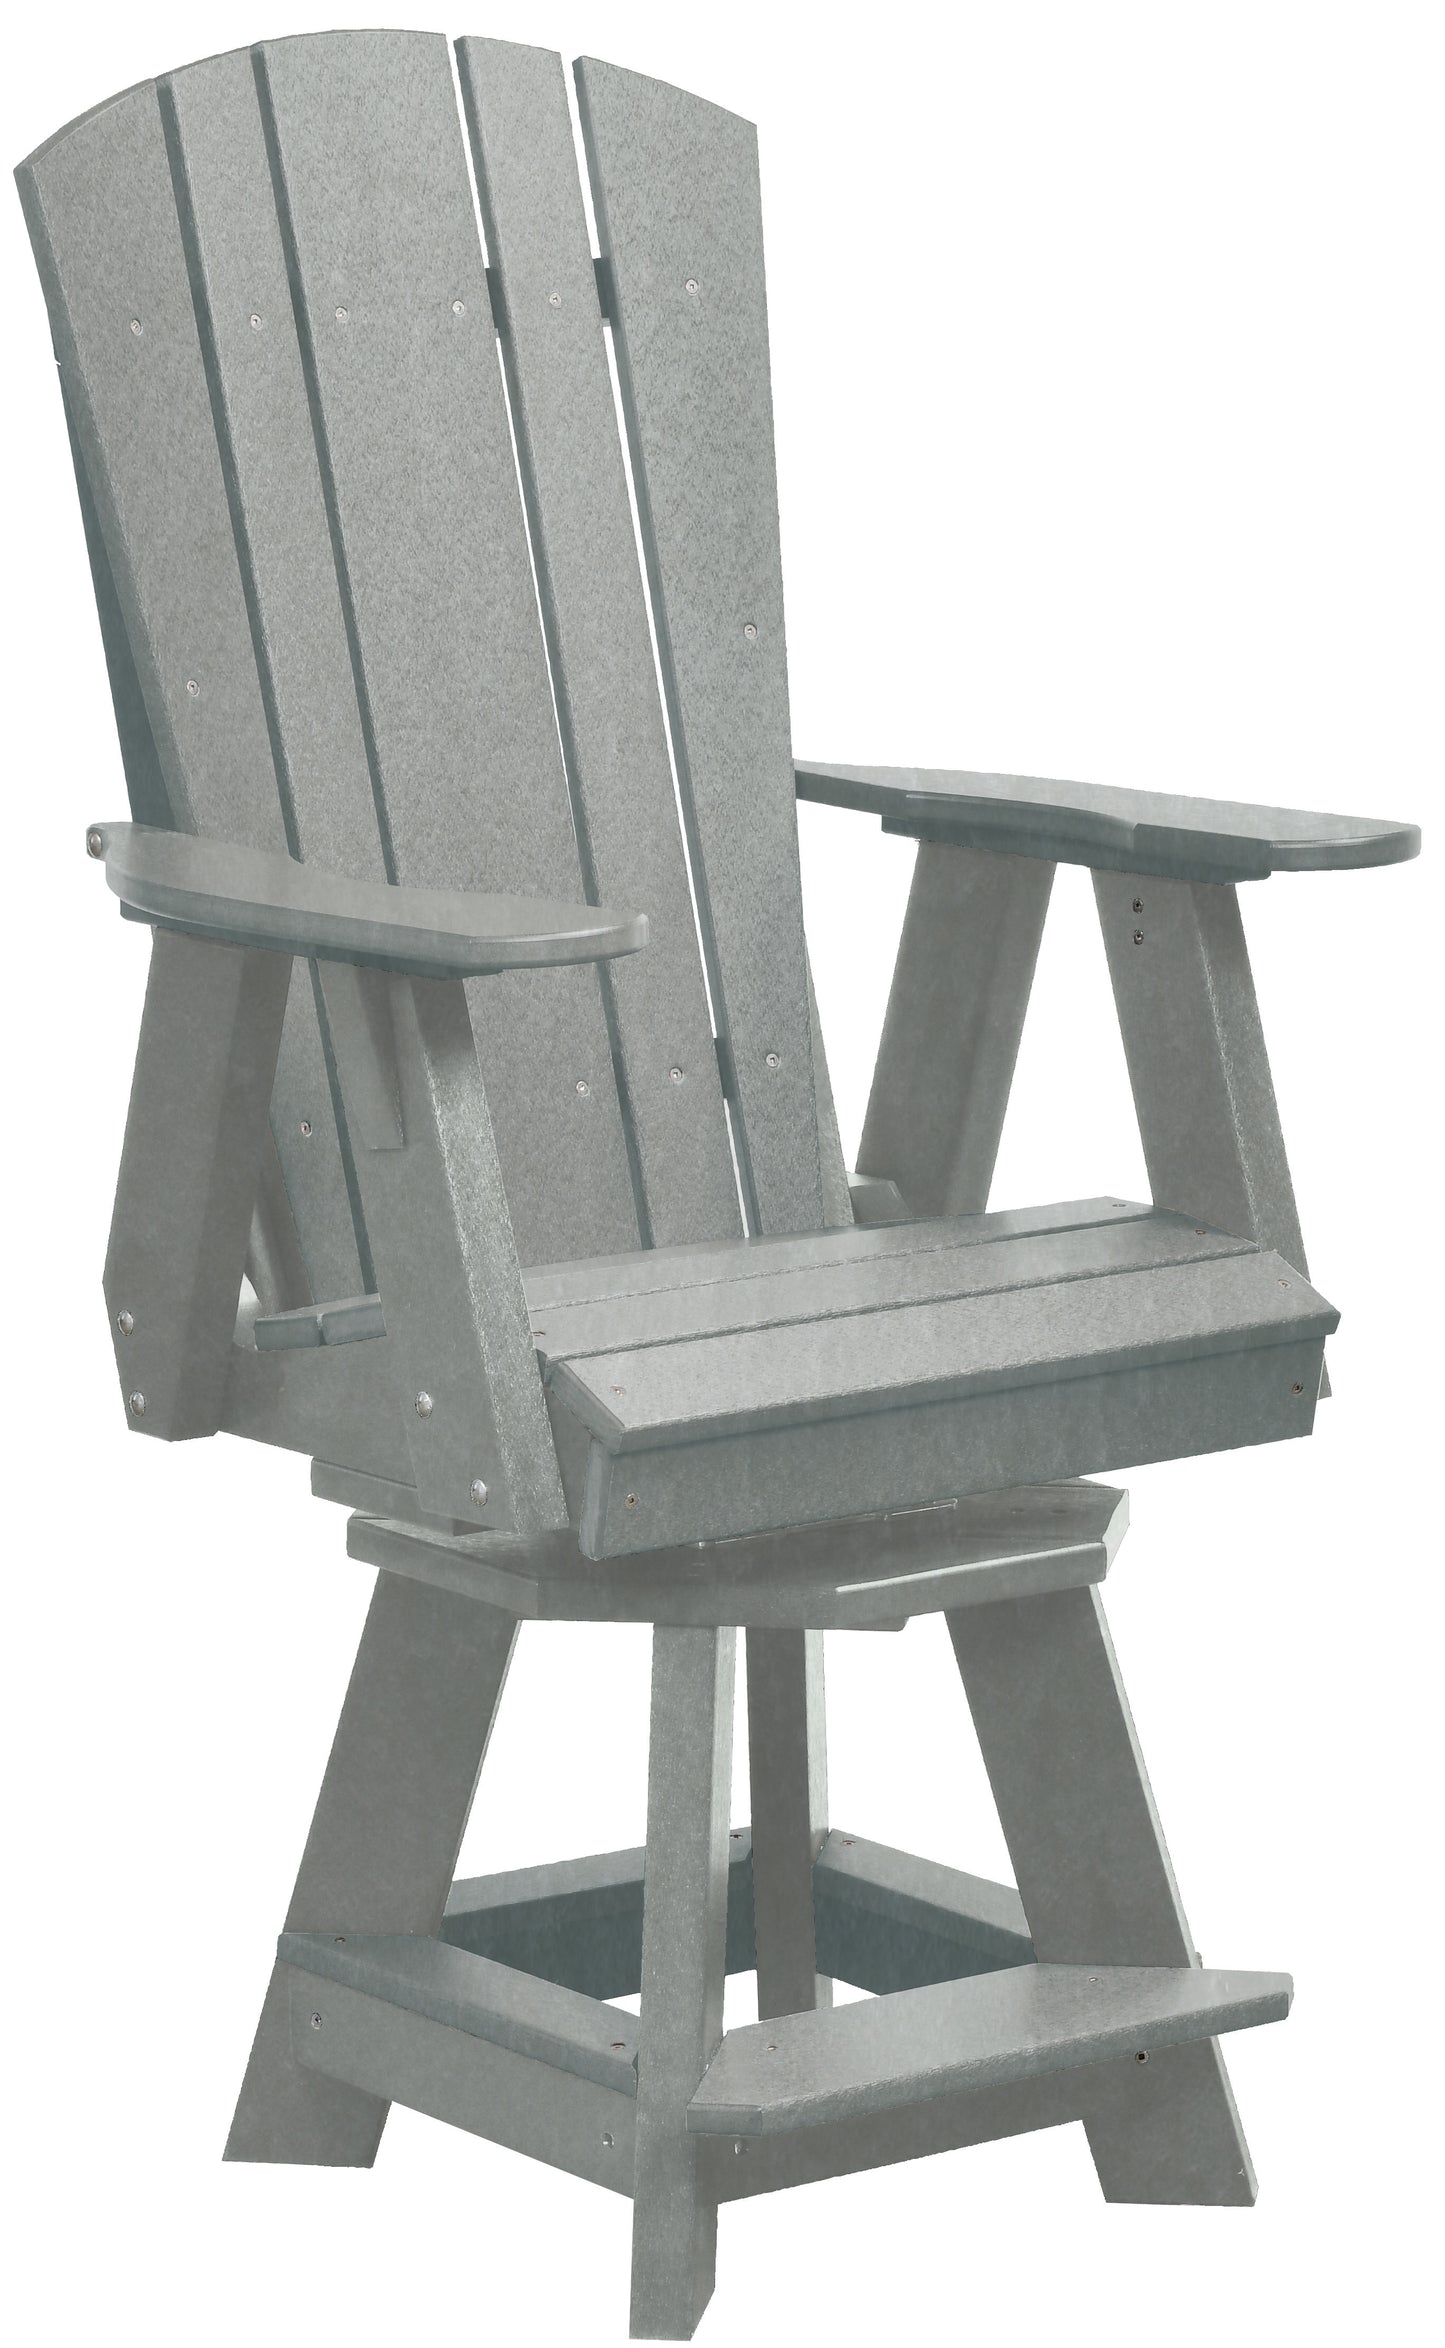 Wildridge Recycled Plastic Heritage Balcony Swivel Chair (Counter Height) - LEAD TIME TO SHIP 3 WEEKS